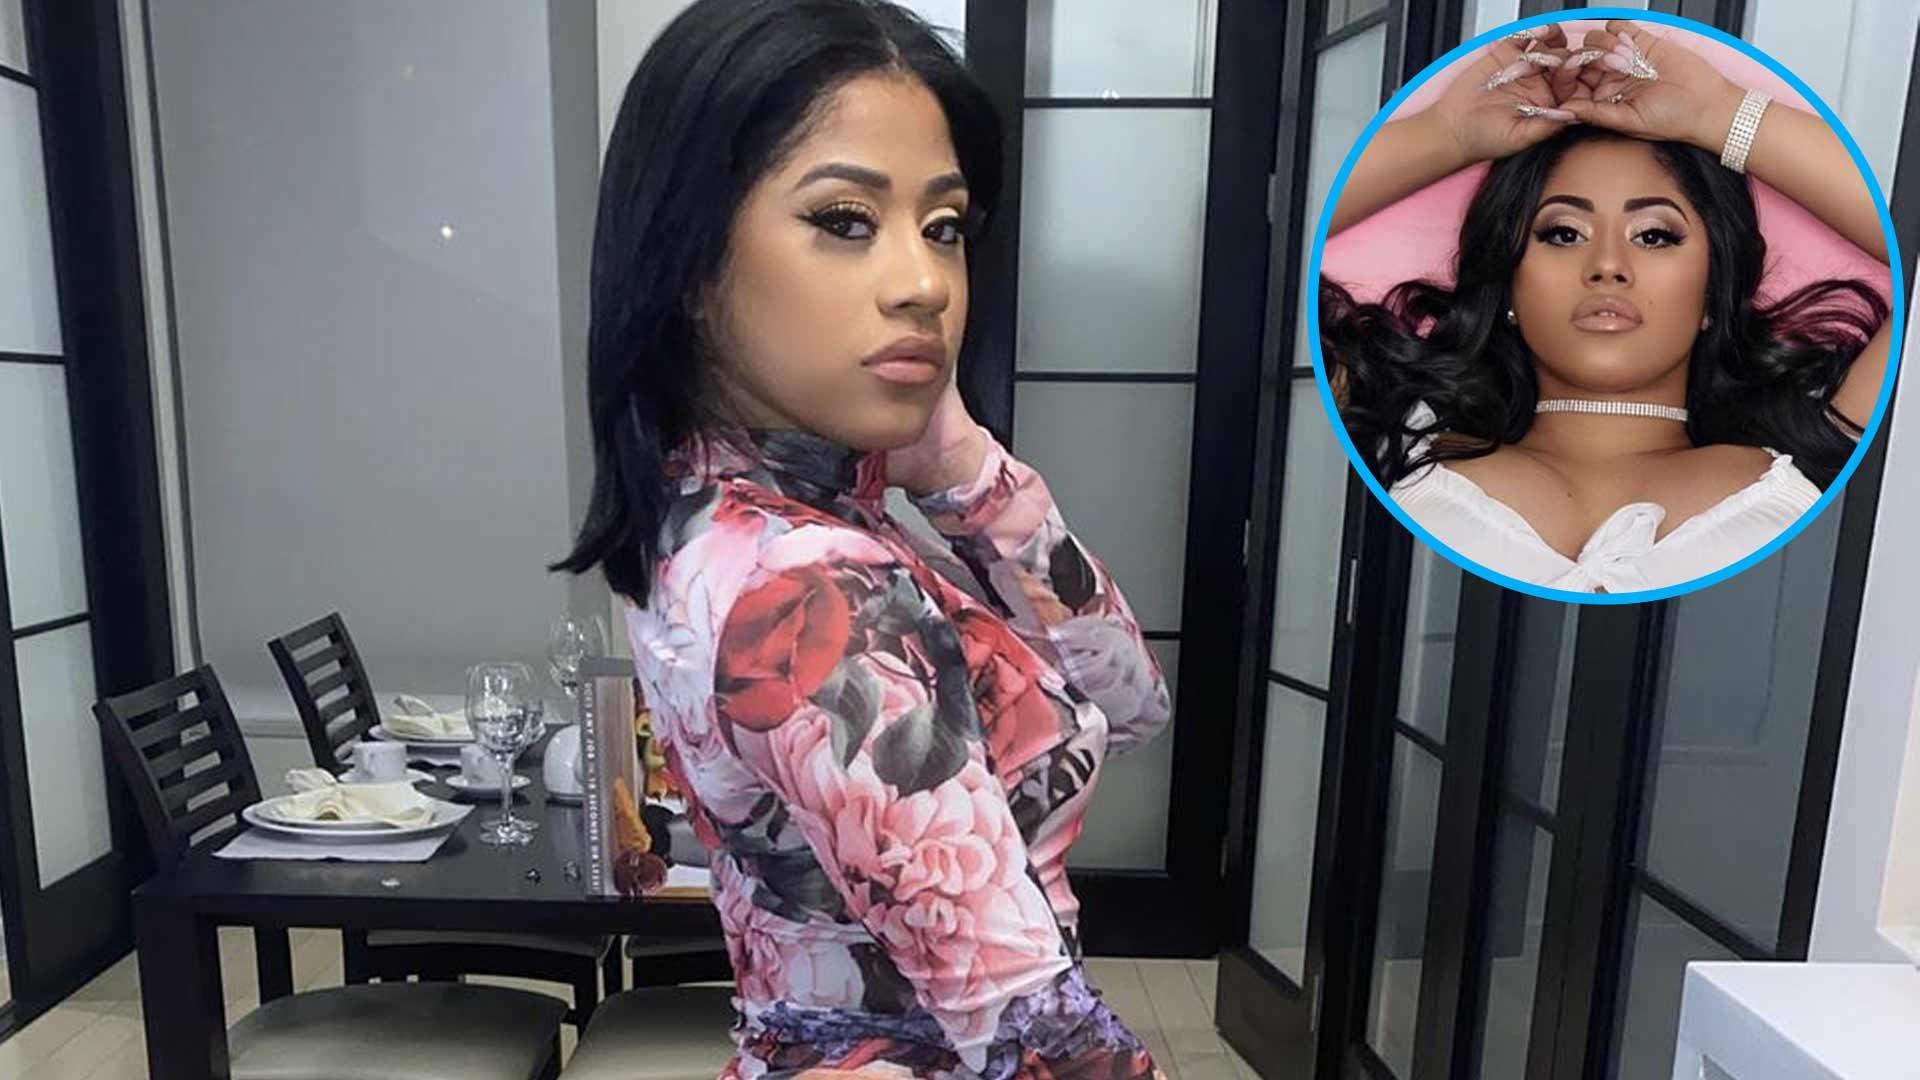 Cardi B’s Sister Hennessy Carolina Shows Off Her Hello Kitty With Quarantine Thirst Trap